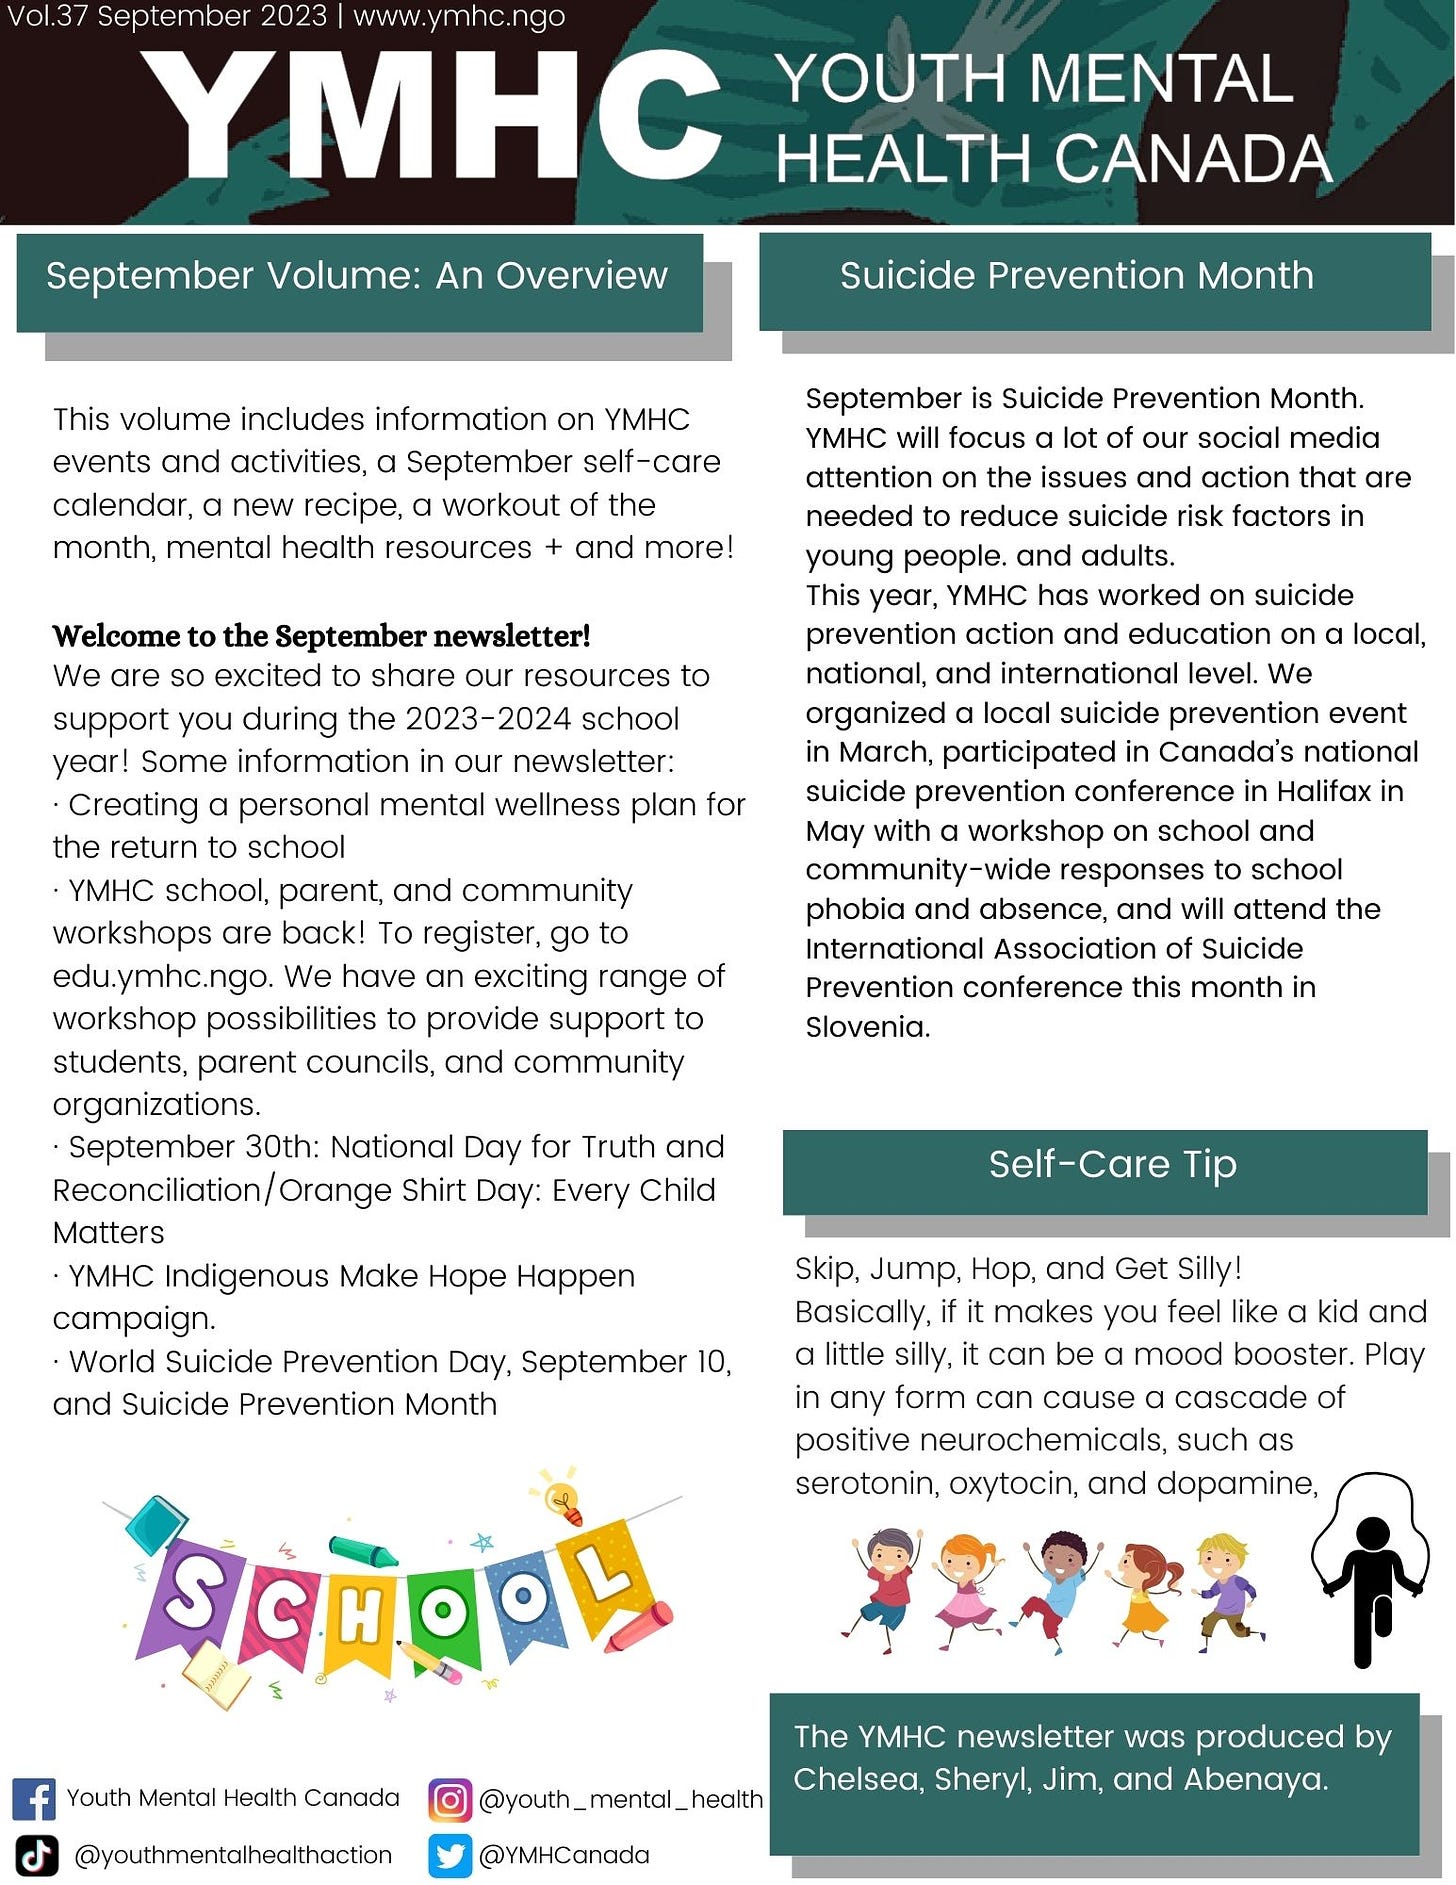 This volume includes information on YMHC events and activities, a September self-care calendar, a new recipe, a workout of the month, mental health resources + and more!  Welcome to the September newsletter!  We are so excited to share our resources to support you during the 2023-2024 school year! Some information in our newsletter: · Creating a personal mental wellness plan for the return to school  · YMHC school, parent, and community workshops are back! To register, go to edu.ymhc.ngo. We have an exciting range of workshop possibilities to provide support to students, parent councils, and community organizations.  · September 30th: National Day for Truth and Reconciliation/Orange Shirt Day: Every Child Matters · YMHC Indigenous Make Hope Happen campaign. · World Suicide Prevention Day, September 10, and Suicide Prevention Month  September is Suicide Prevention Month. YMHC will focus a lot of our social media attention on the issues and action that are needed to reduce suicide risk factors in young people. and adults. This year, YMHC has worked on suicide prevention action and education on a local, national, and international level. We organized a local suicide prevention event in March, participated in Canada’s national suicide prevention conference in Halifax in May with a workshop on school and community-wide responses to school phobia and absence, and will attend the International Association of Suicide Prevention conference this month in Slovenia.  Skip, Jump, Hop, and Get Silly! Basically, if it makes you feel like a kid and a little silly, it can be a mood booster. Play in any form can cause a cascade of positive neurochemicals, such as serotonin, oxytocin, and dopamine,